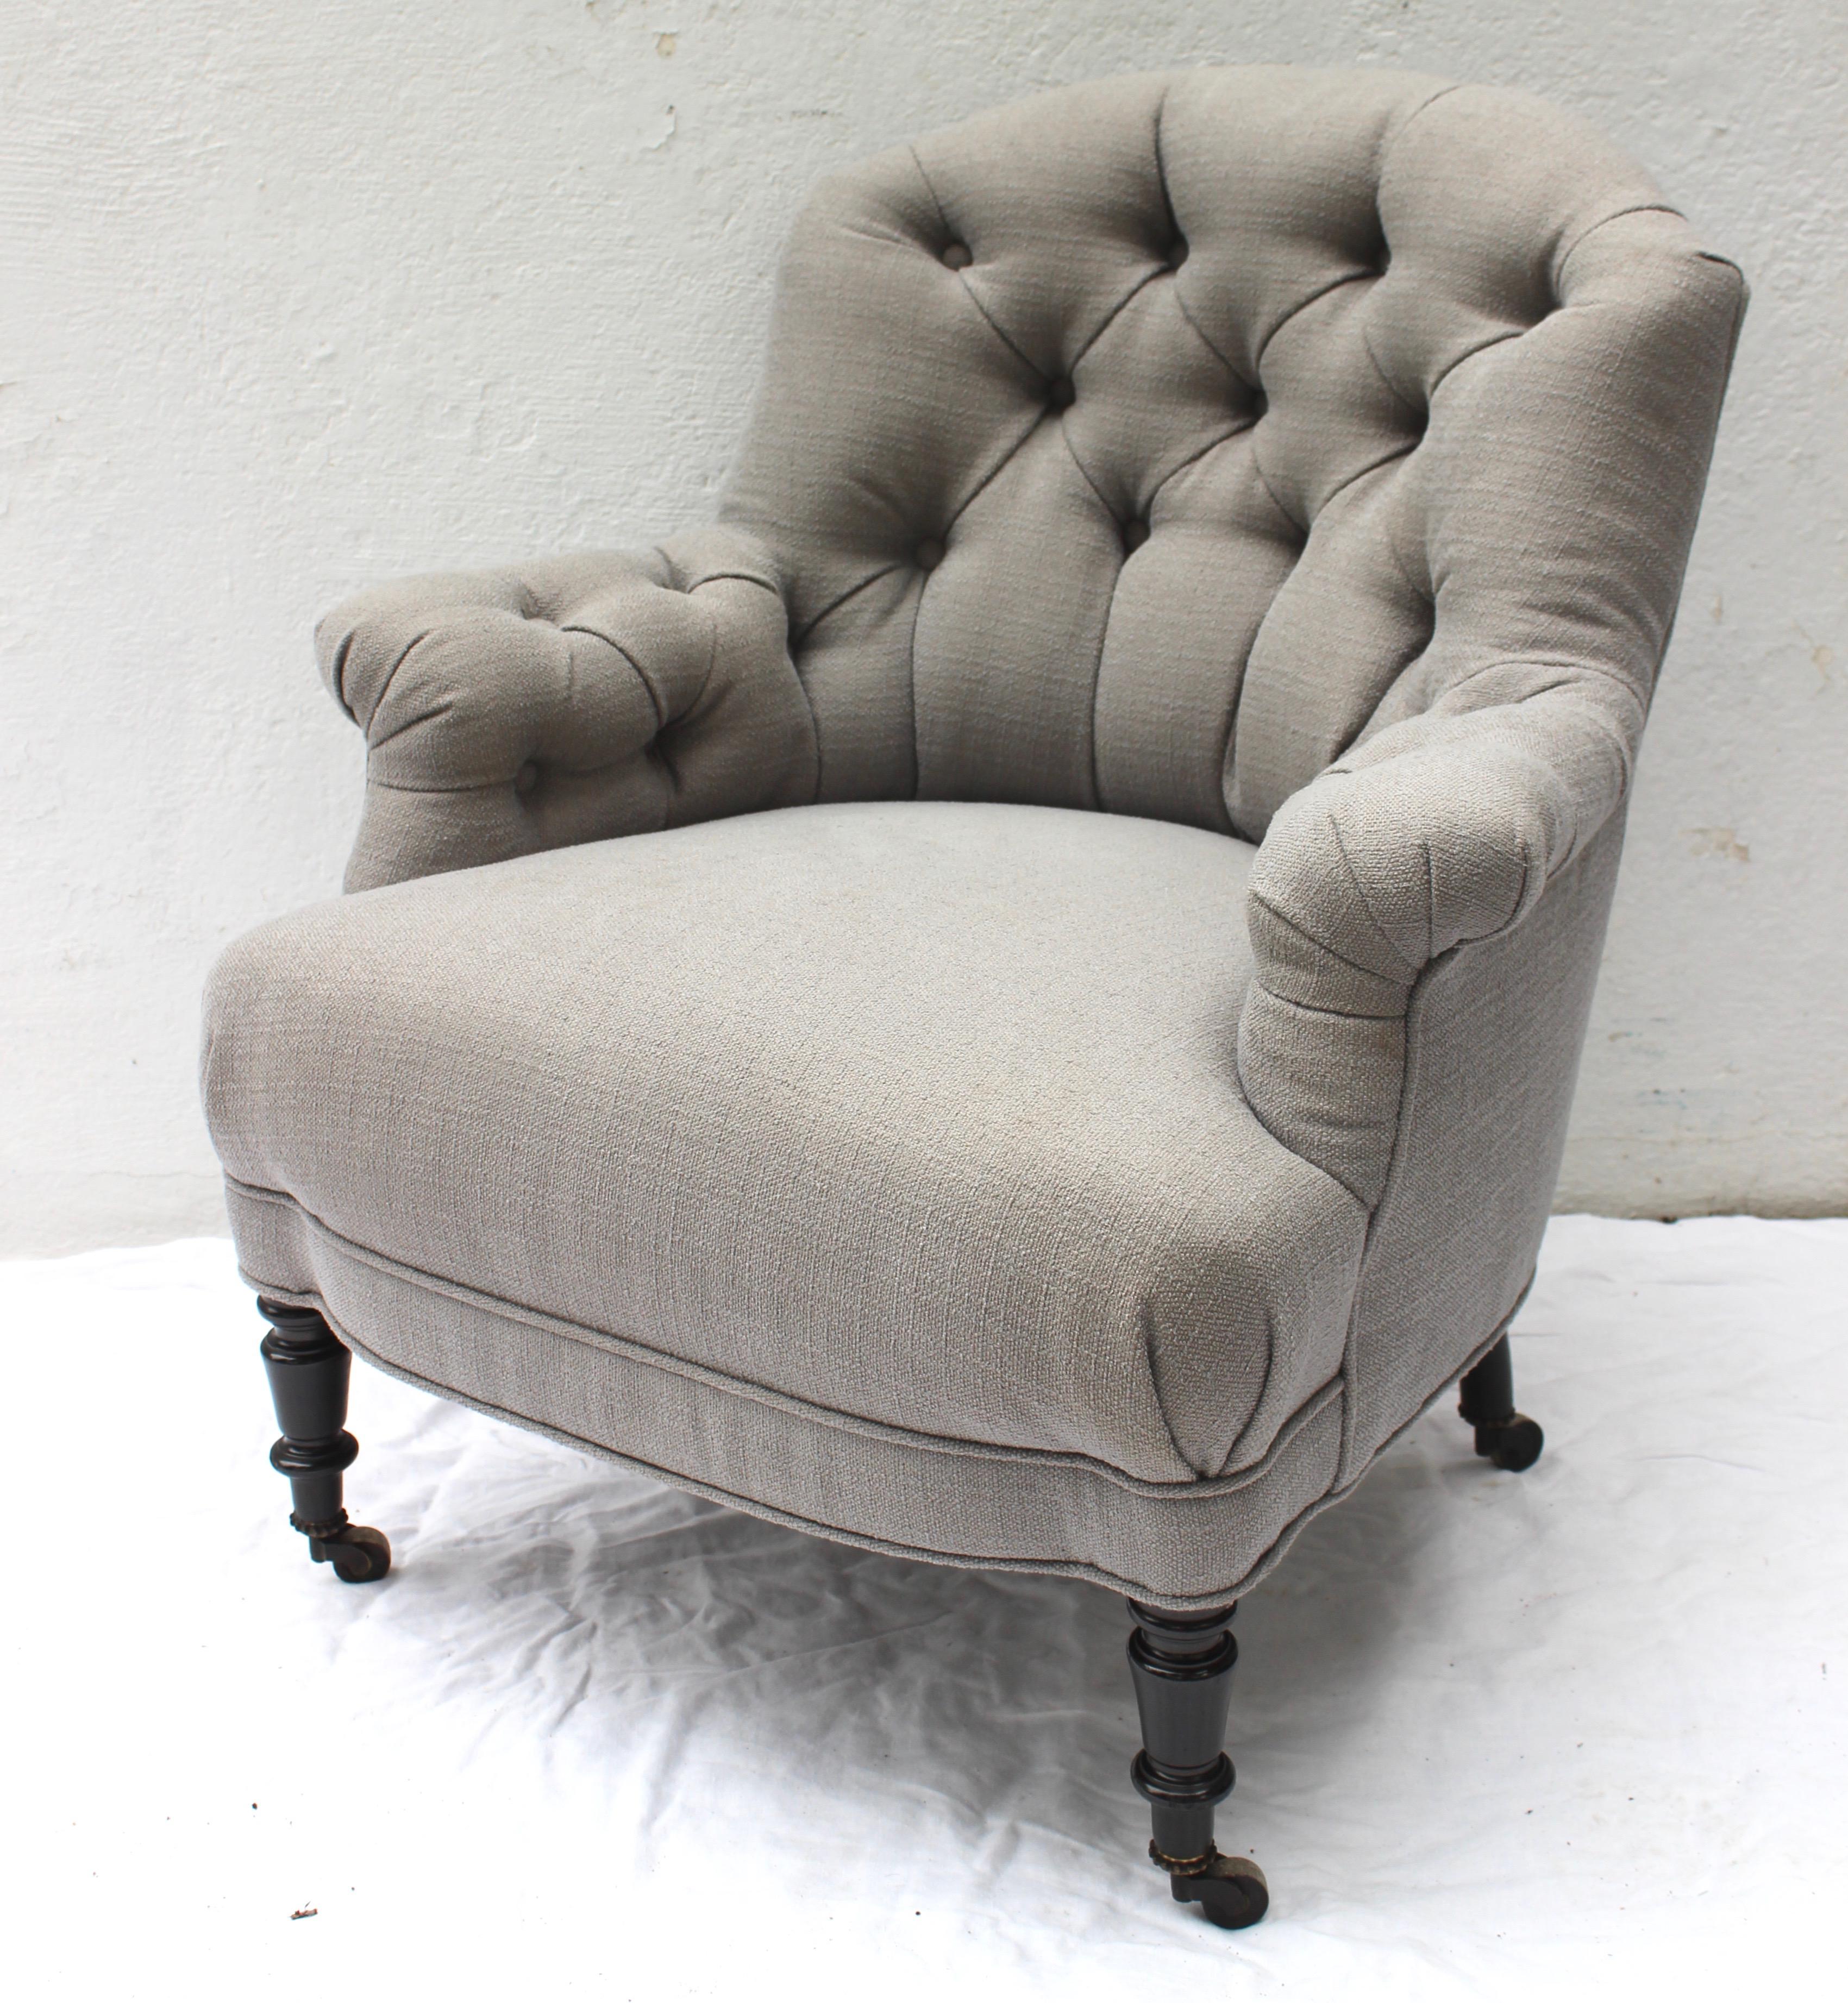 19th century French round back button tufted armchair... New upholstery and ebonized legs on casters.